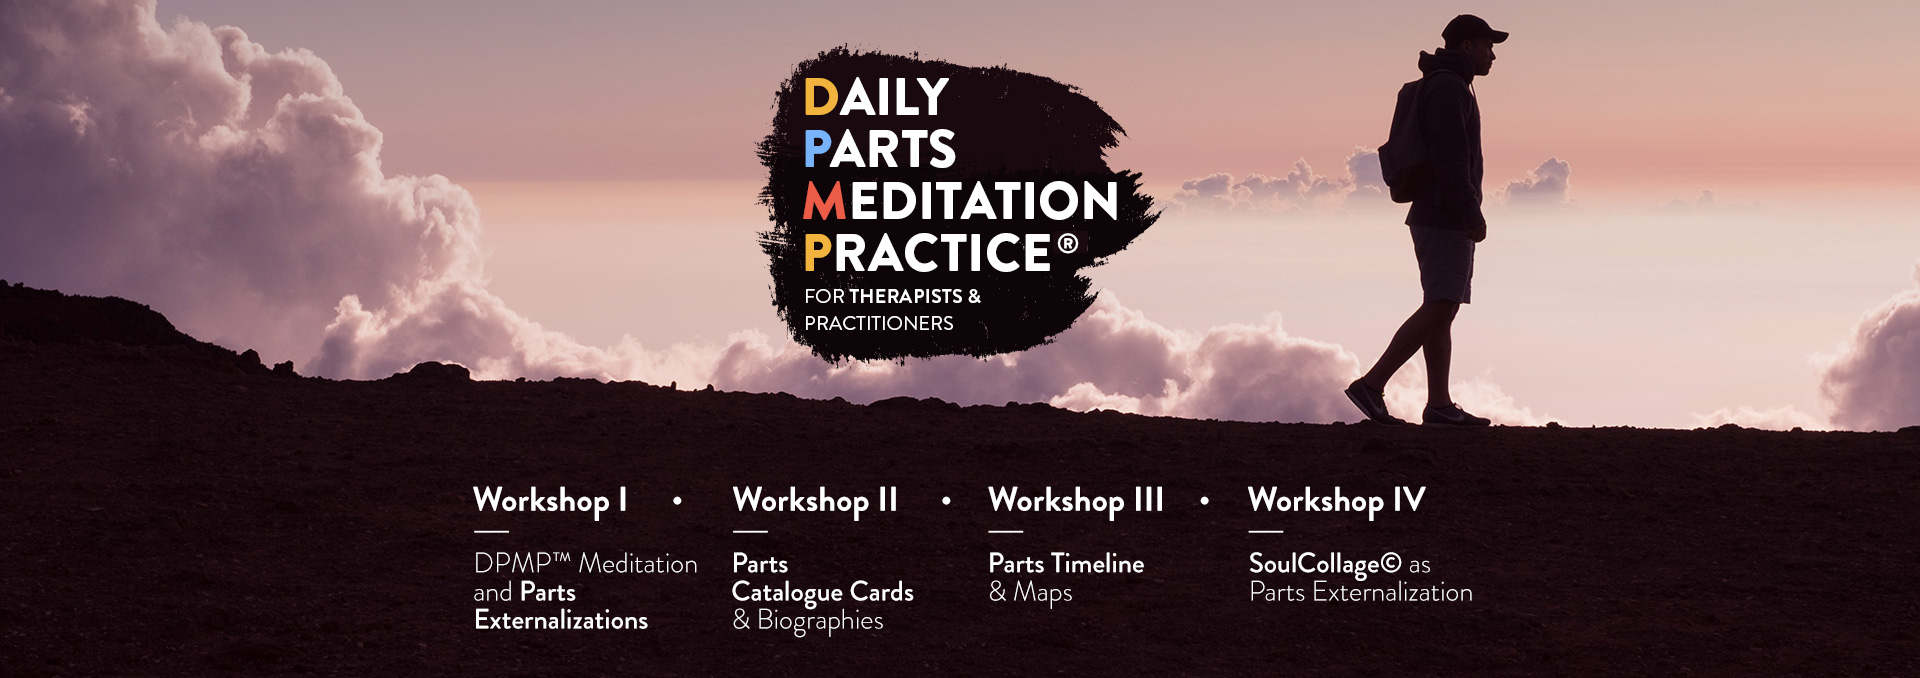 Daily Parts Meditation Practice® for Therapists &amp; Practitioners 2